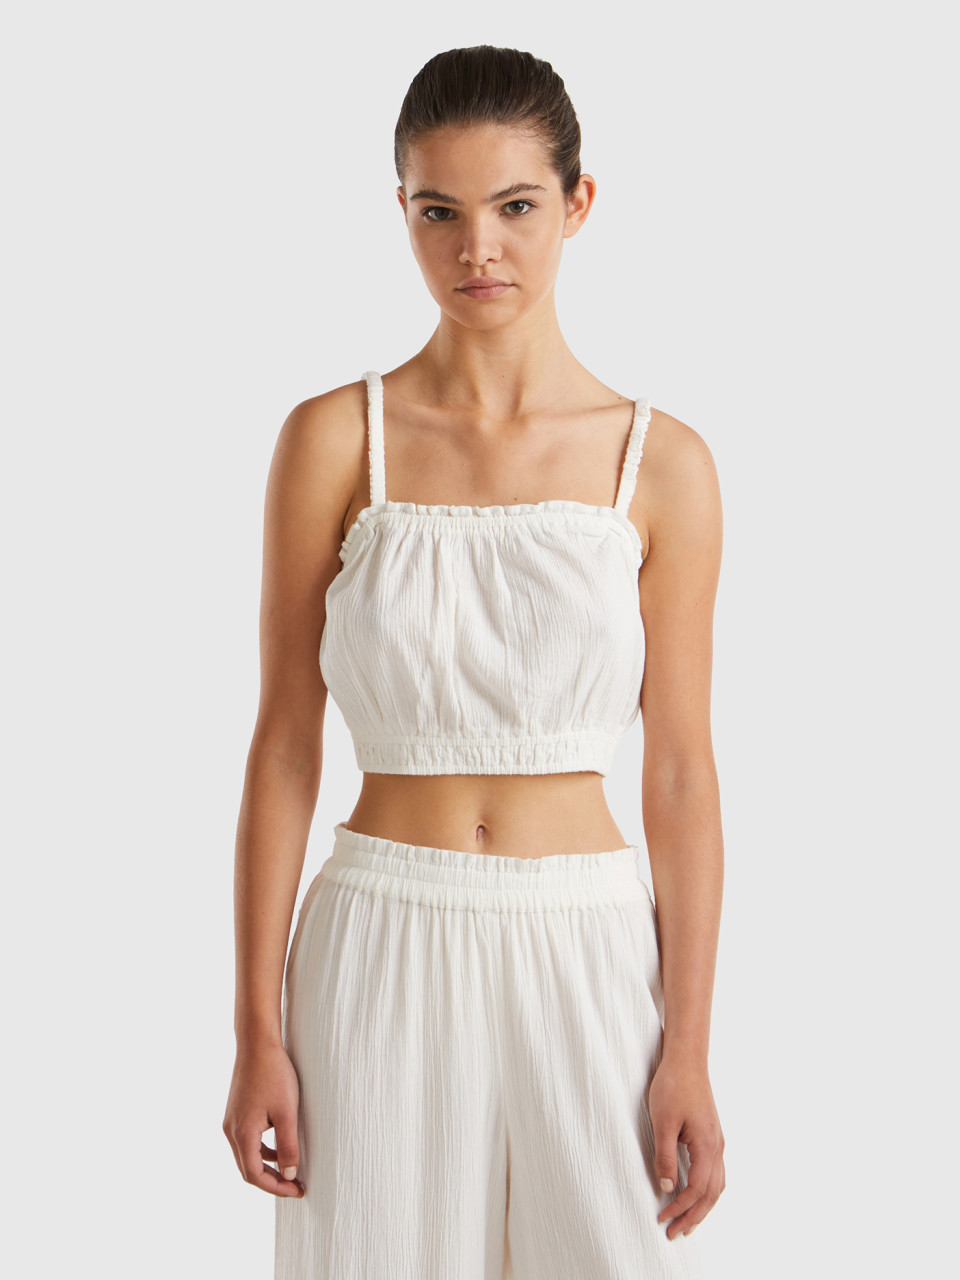 Benetton, Cropped Top 100% Baumwolle, Cremeweiss, female